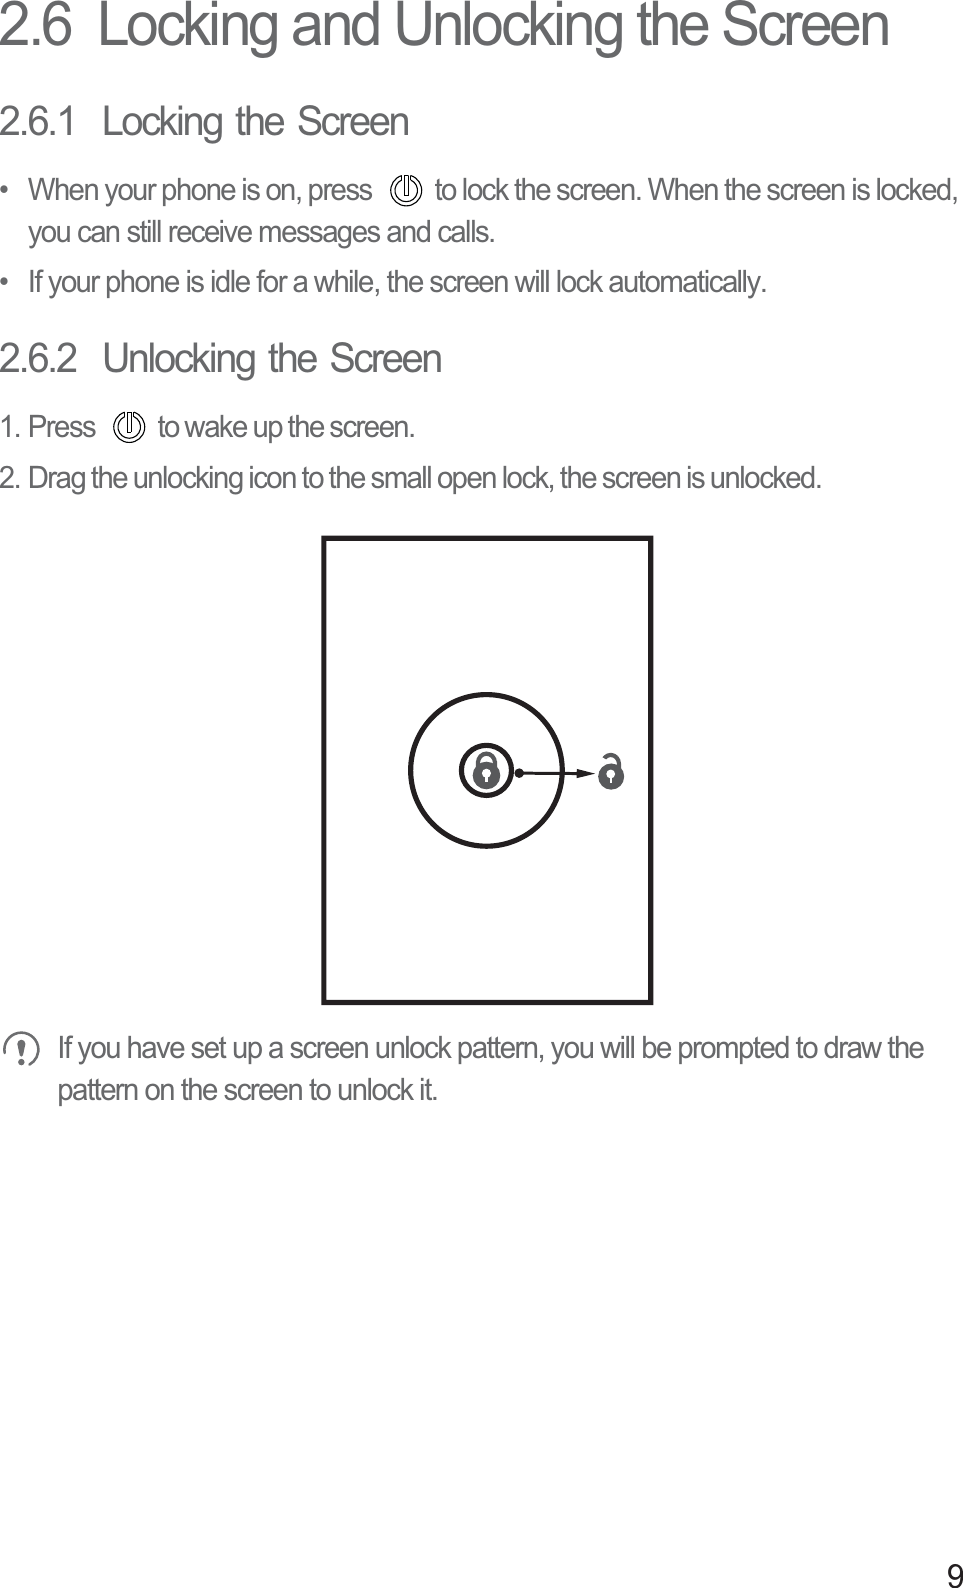 92.6  Locking and Unlocking the Screen2.6.1  Locking the Screen•  When your phone is on, press  to lock the screen. When the screen is locked, you can still receive messages and calls.•  If your phone is idle for a while, the screen will lock automatically.2.6.2  Unlocking the Screen1. Press  to wake up the screen.2. Drag the unlocking icon to the small open lock, the screen is unlocked.  If you have set up a screen unlock pattern, you will be prompted to draw the pattern on the screen to unlock it.